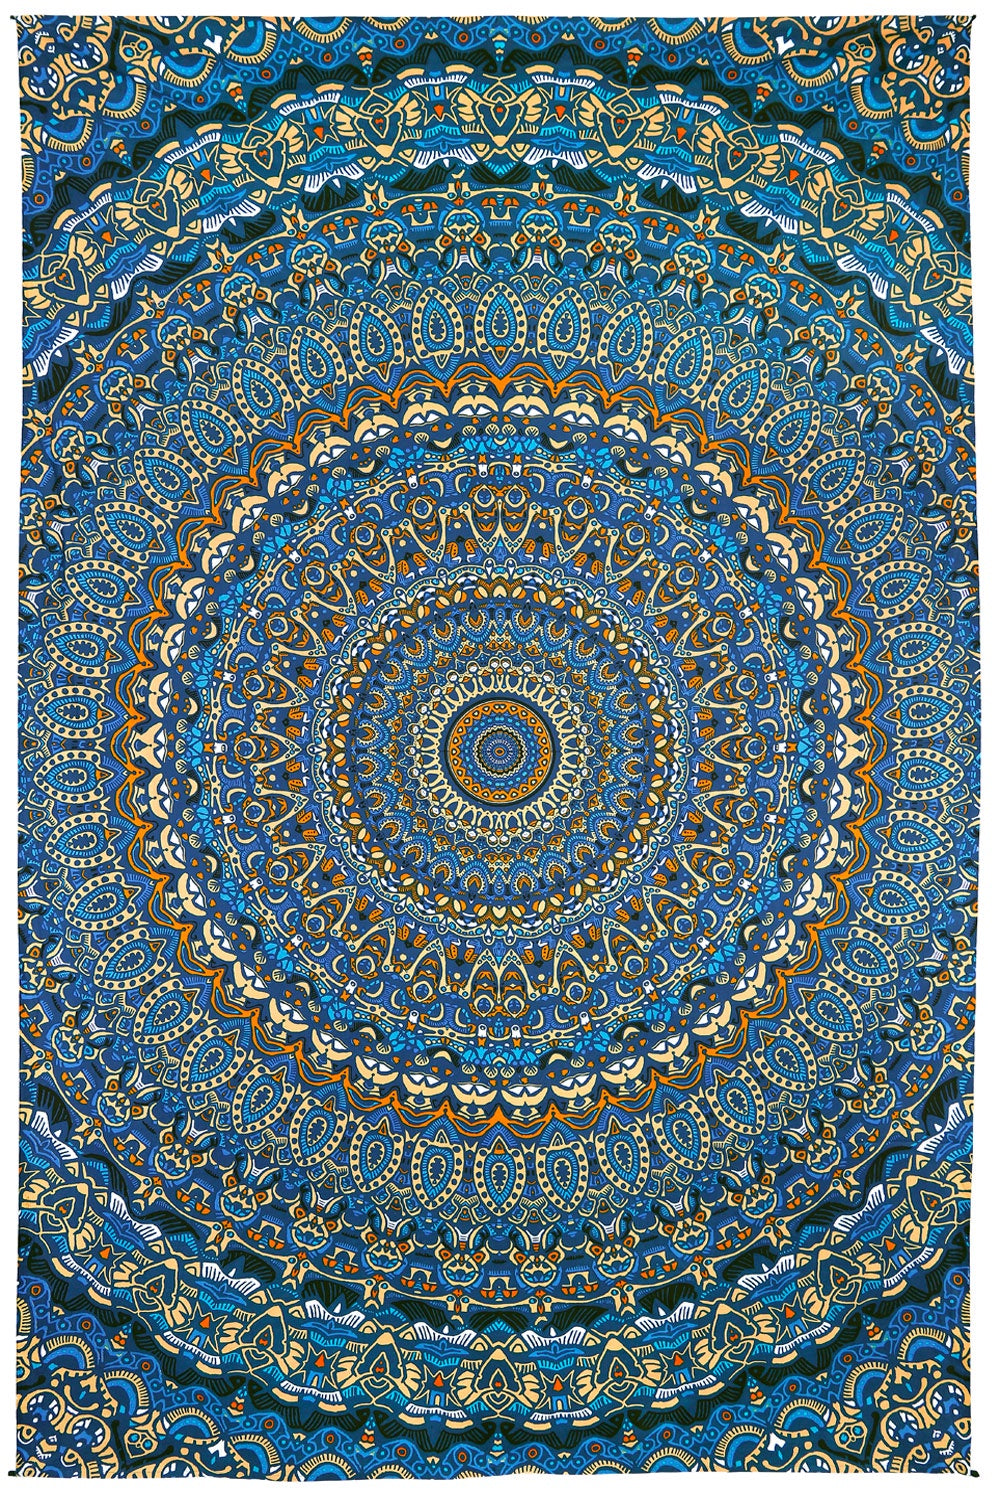 Harmony in Color Chris Pinkerton Tapestry